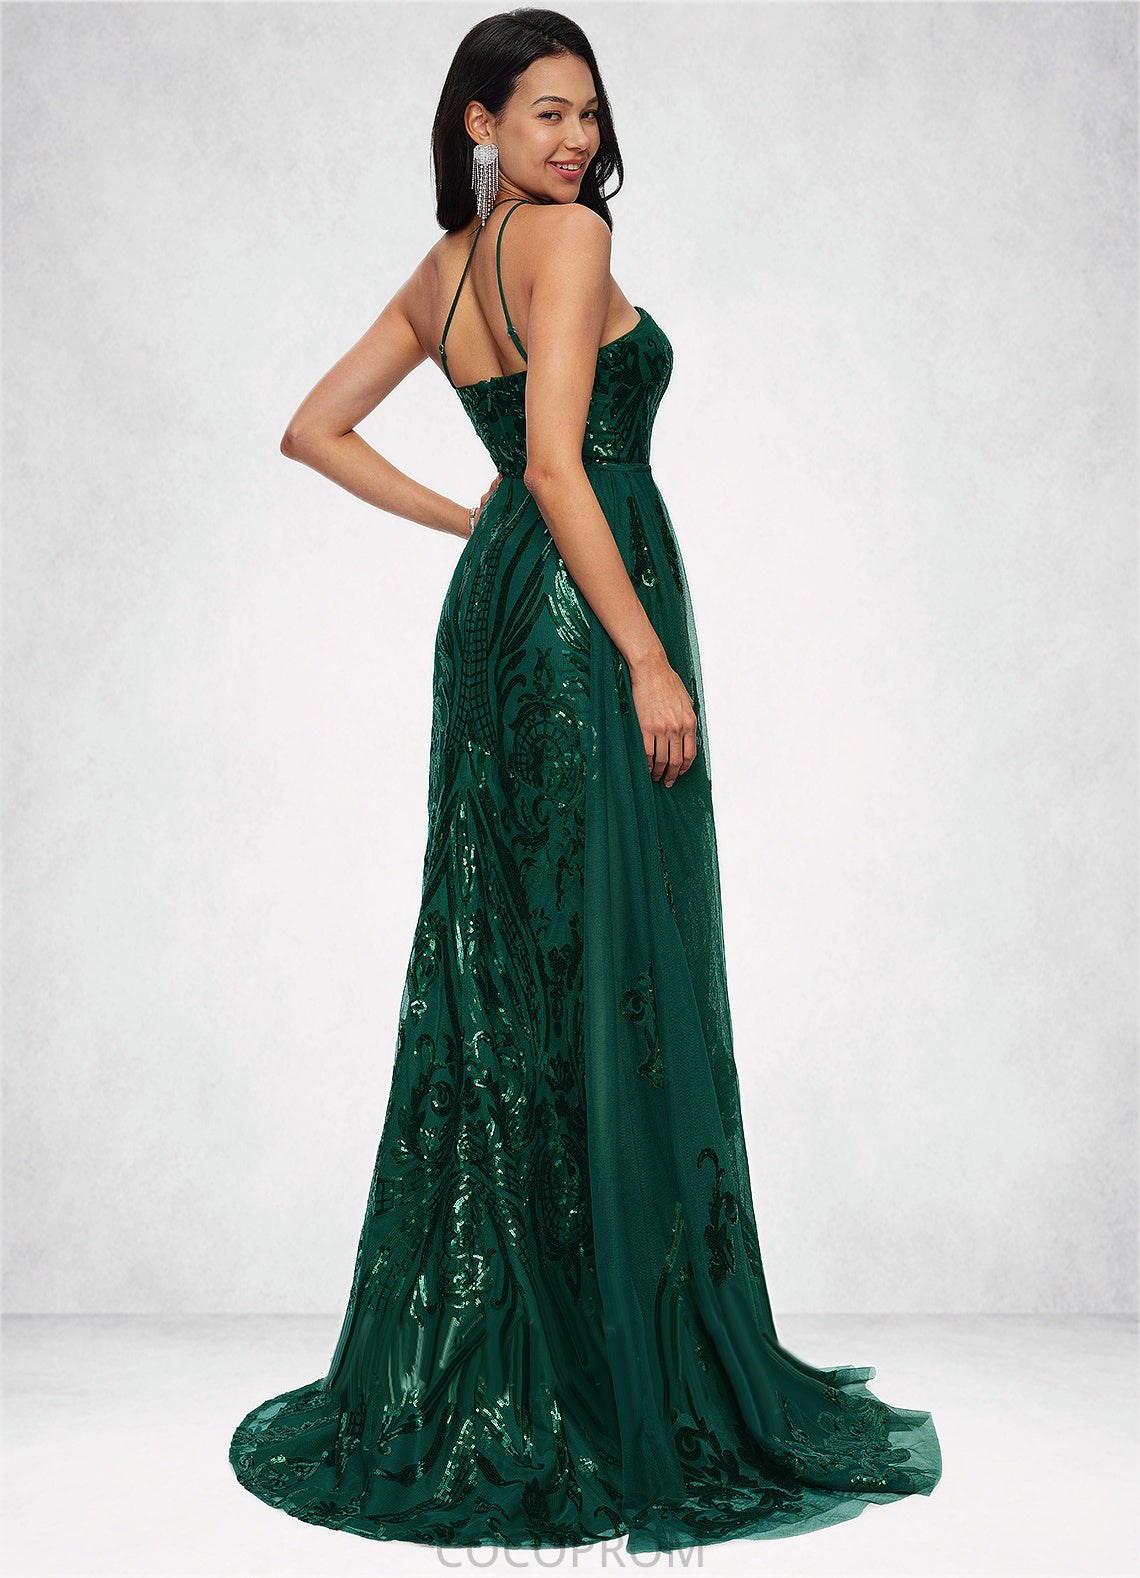 Valery Trumpet/Mermaid One Shoulder Sweep Train Sequin Prom Dresses With Sequins DBP0022226